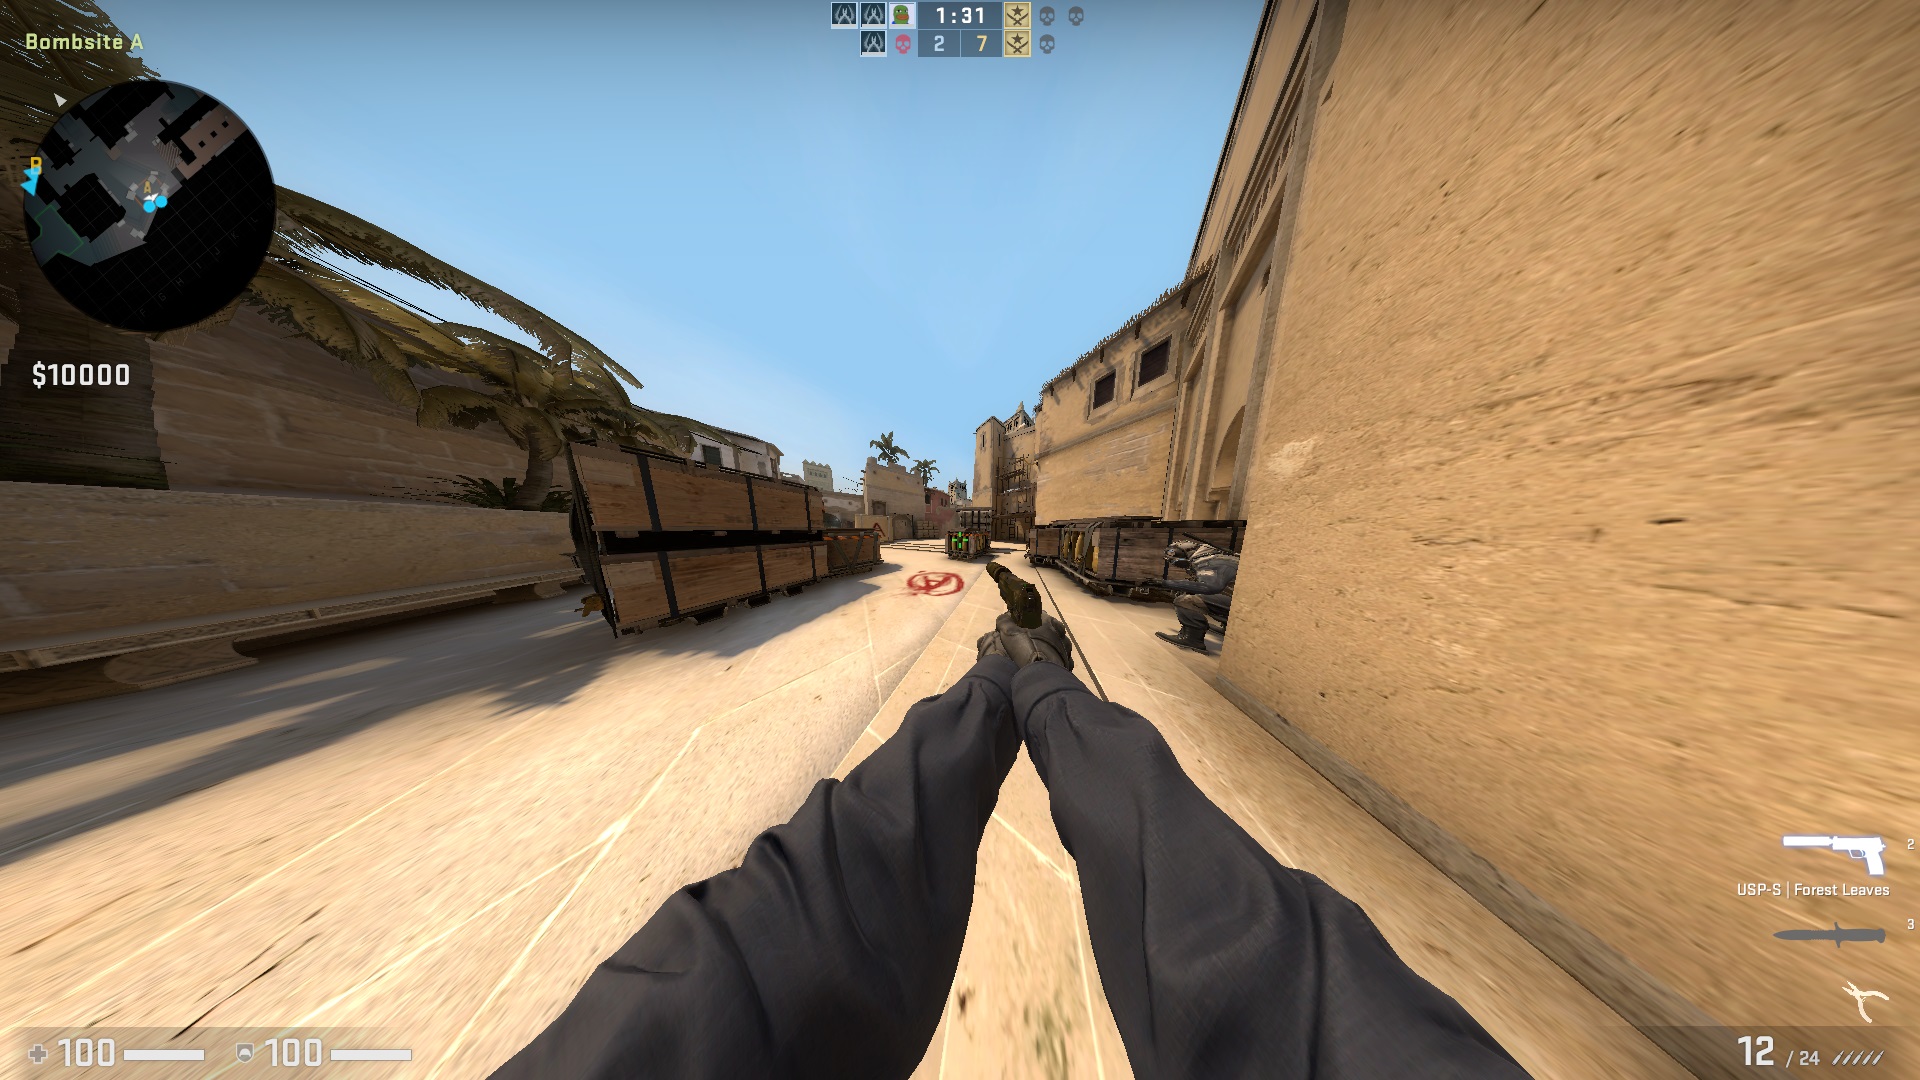 CSGO: How to Change Field of View